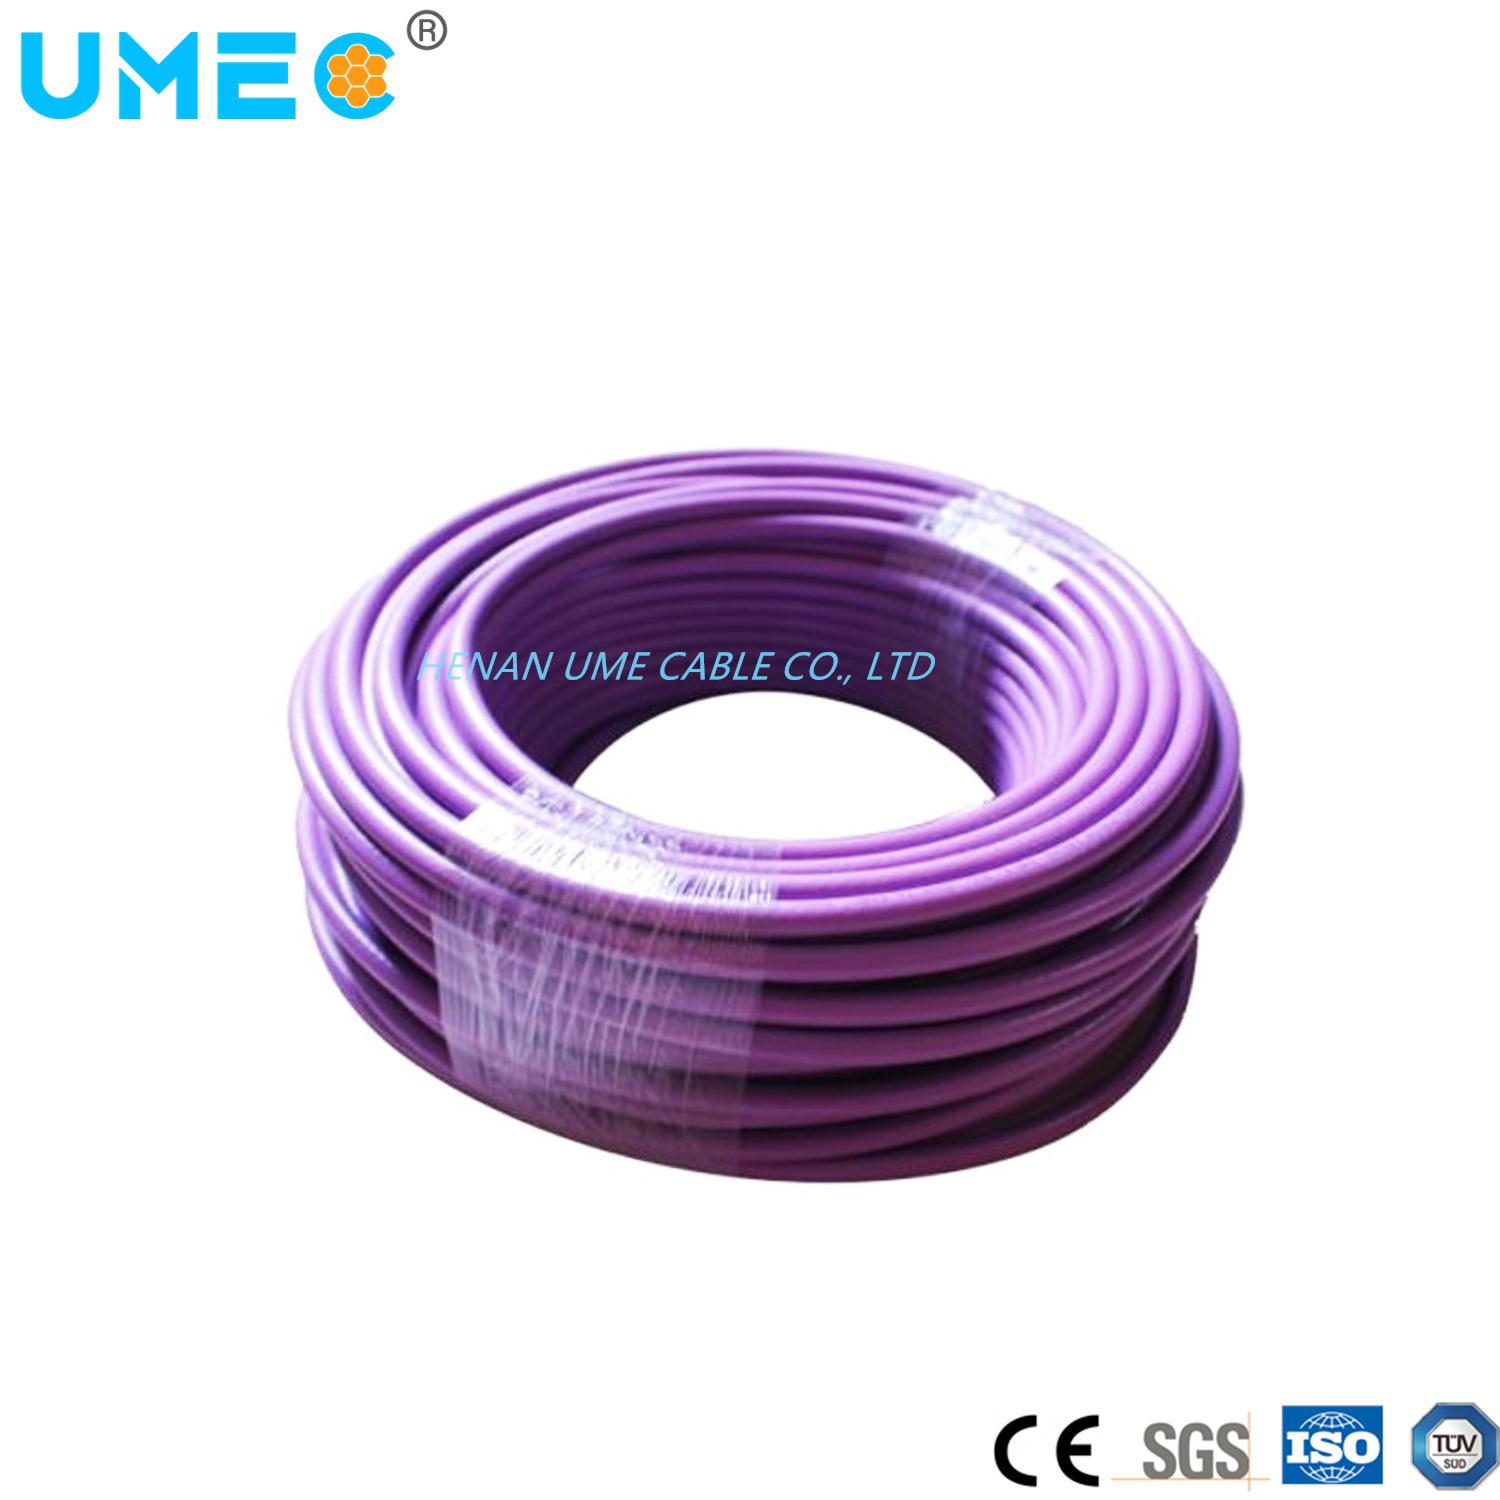 Siemens Wire and Cable/6xv Purple Cable 6xv1830-0eh10 Copper Conductor Low Voltage Connection Cable